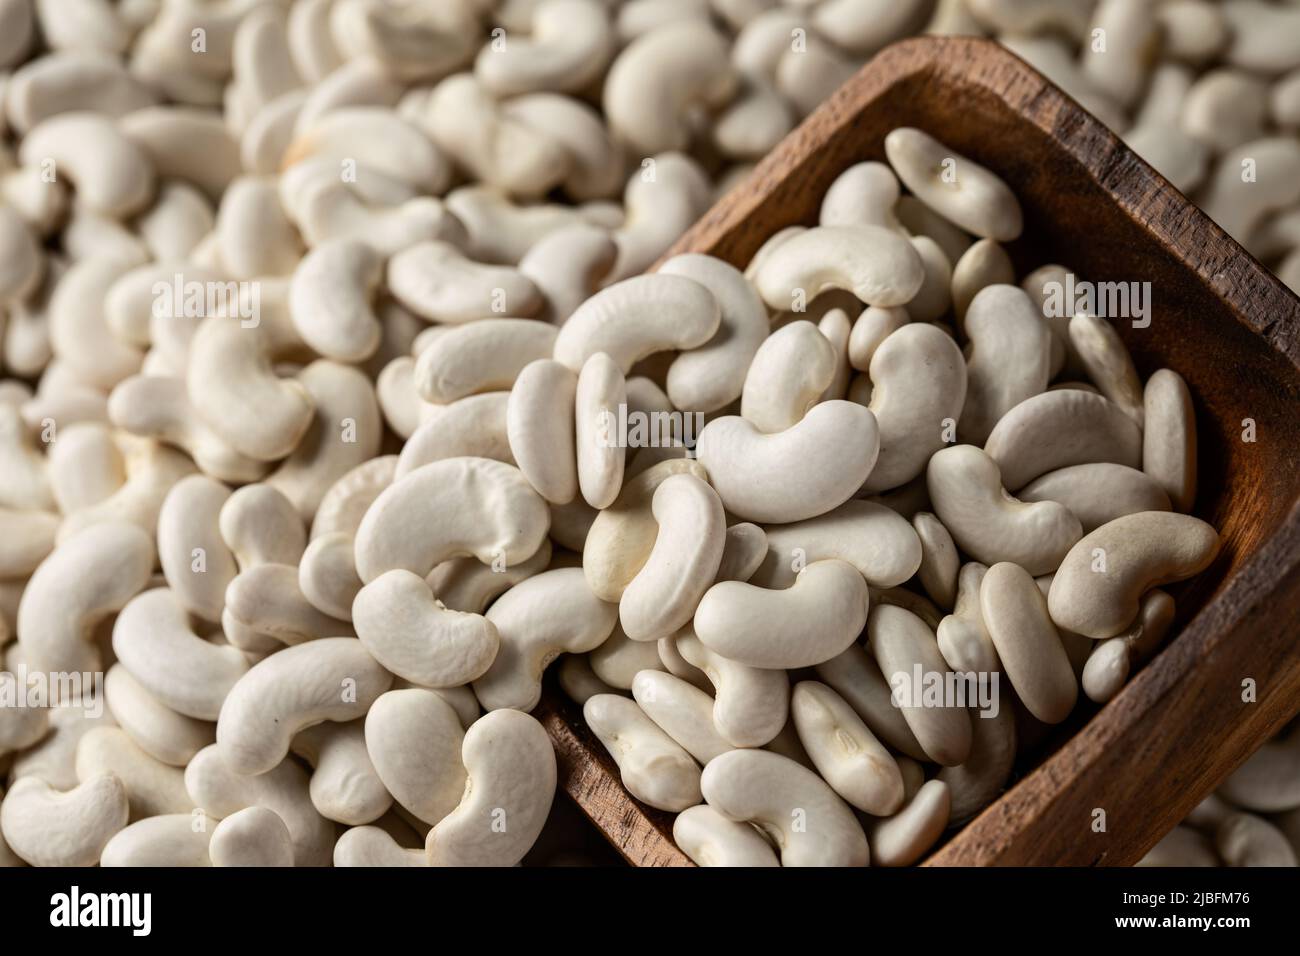 Top view of wooden cup full of healthy dried uncooked white bean seeds stacked together Stock Photo